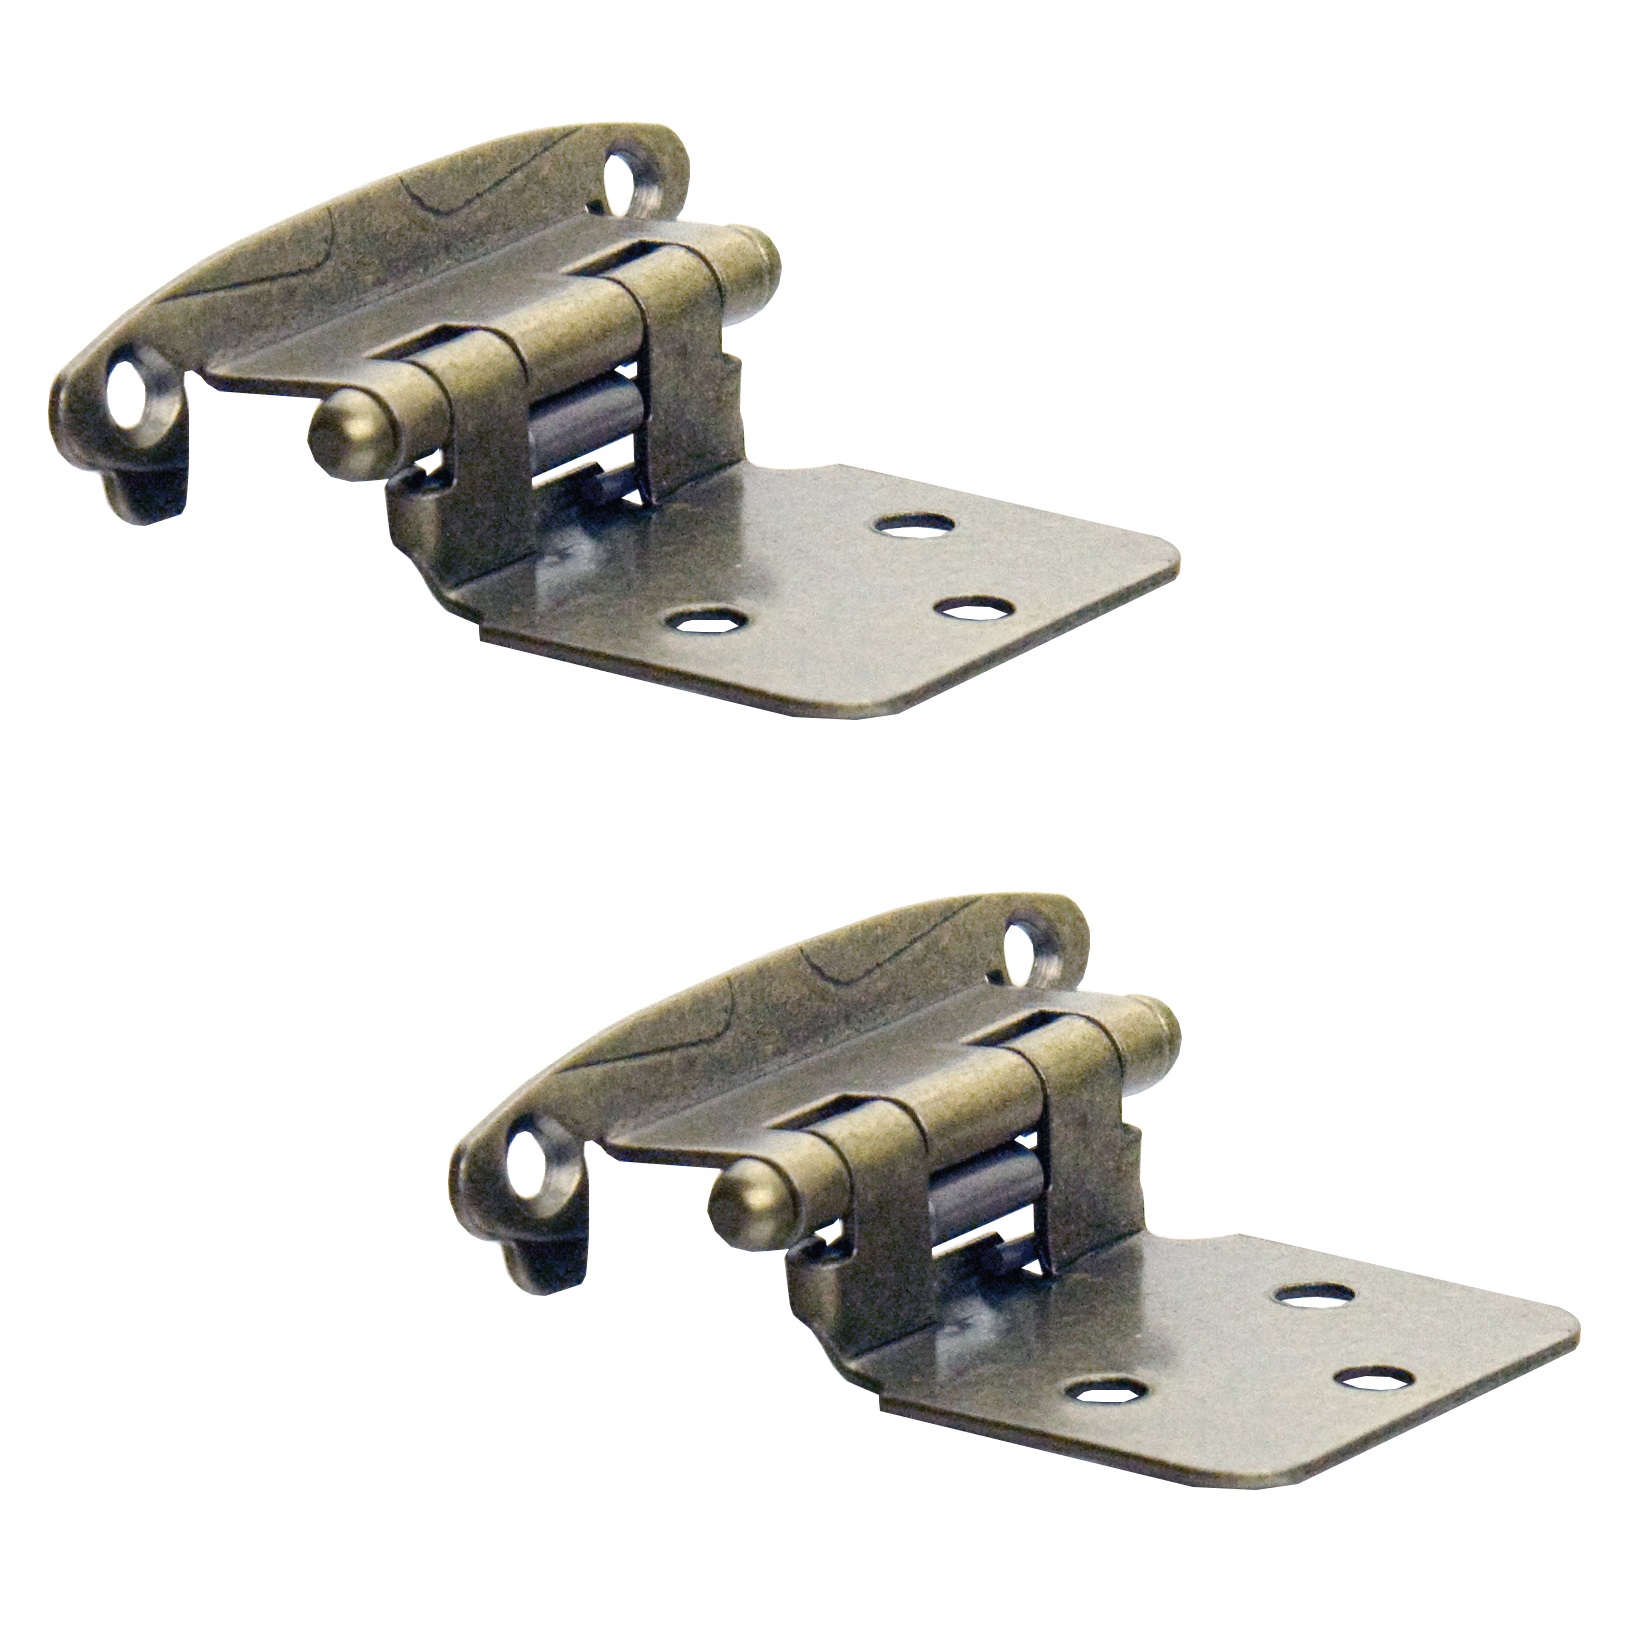 https://it.furniton.com/wp-content/uploads/set-2-vintage-classic-hinges-varia-framed-cabinets-steel-bronze-plated-self-closing-catch-function-siso-umaxo-15.90.010.jpg